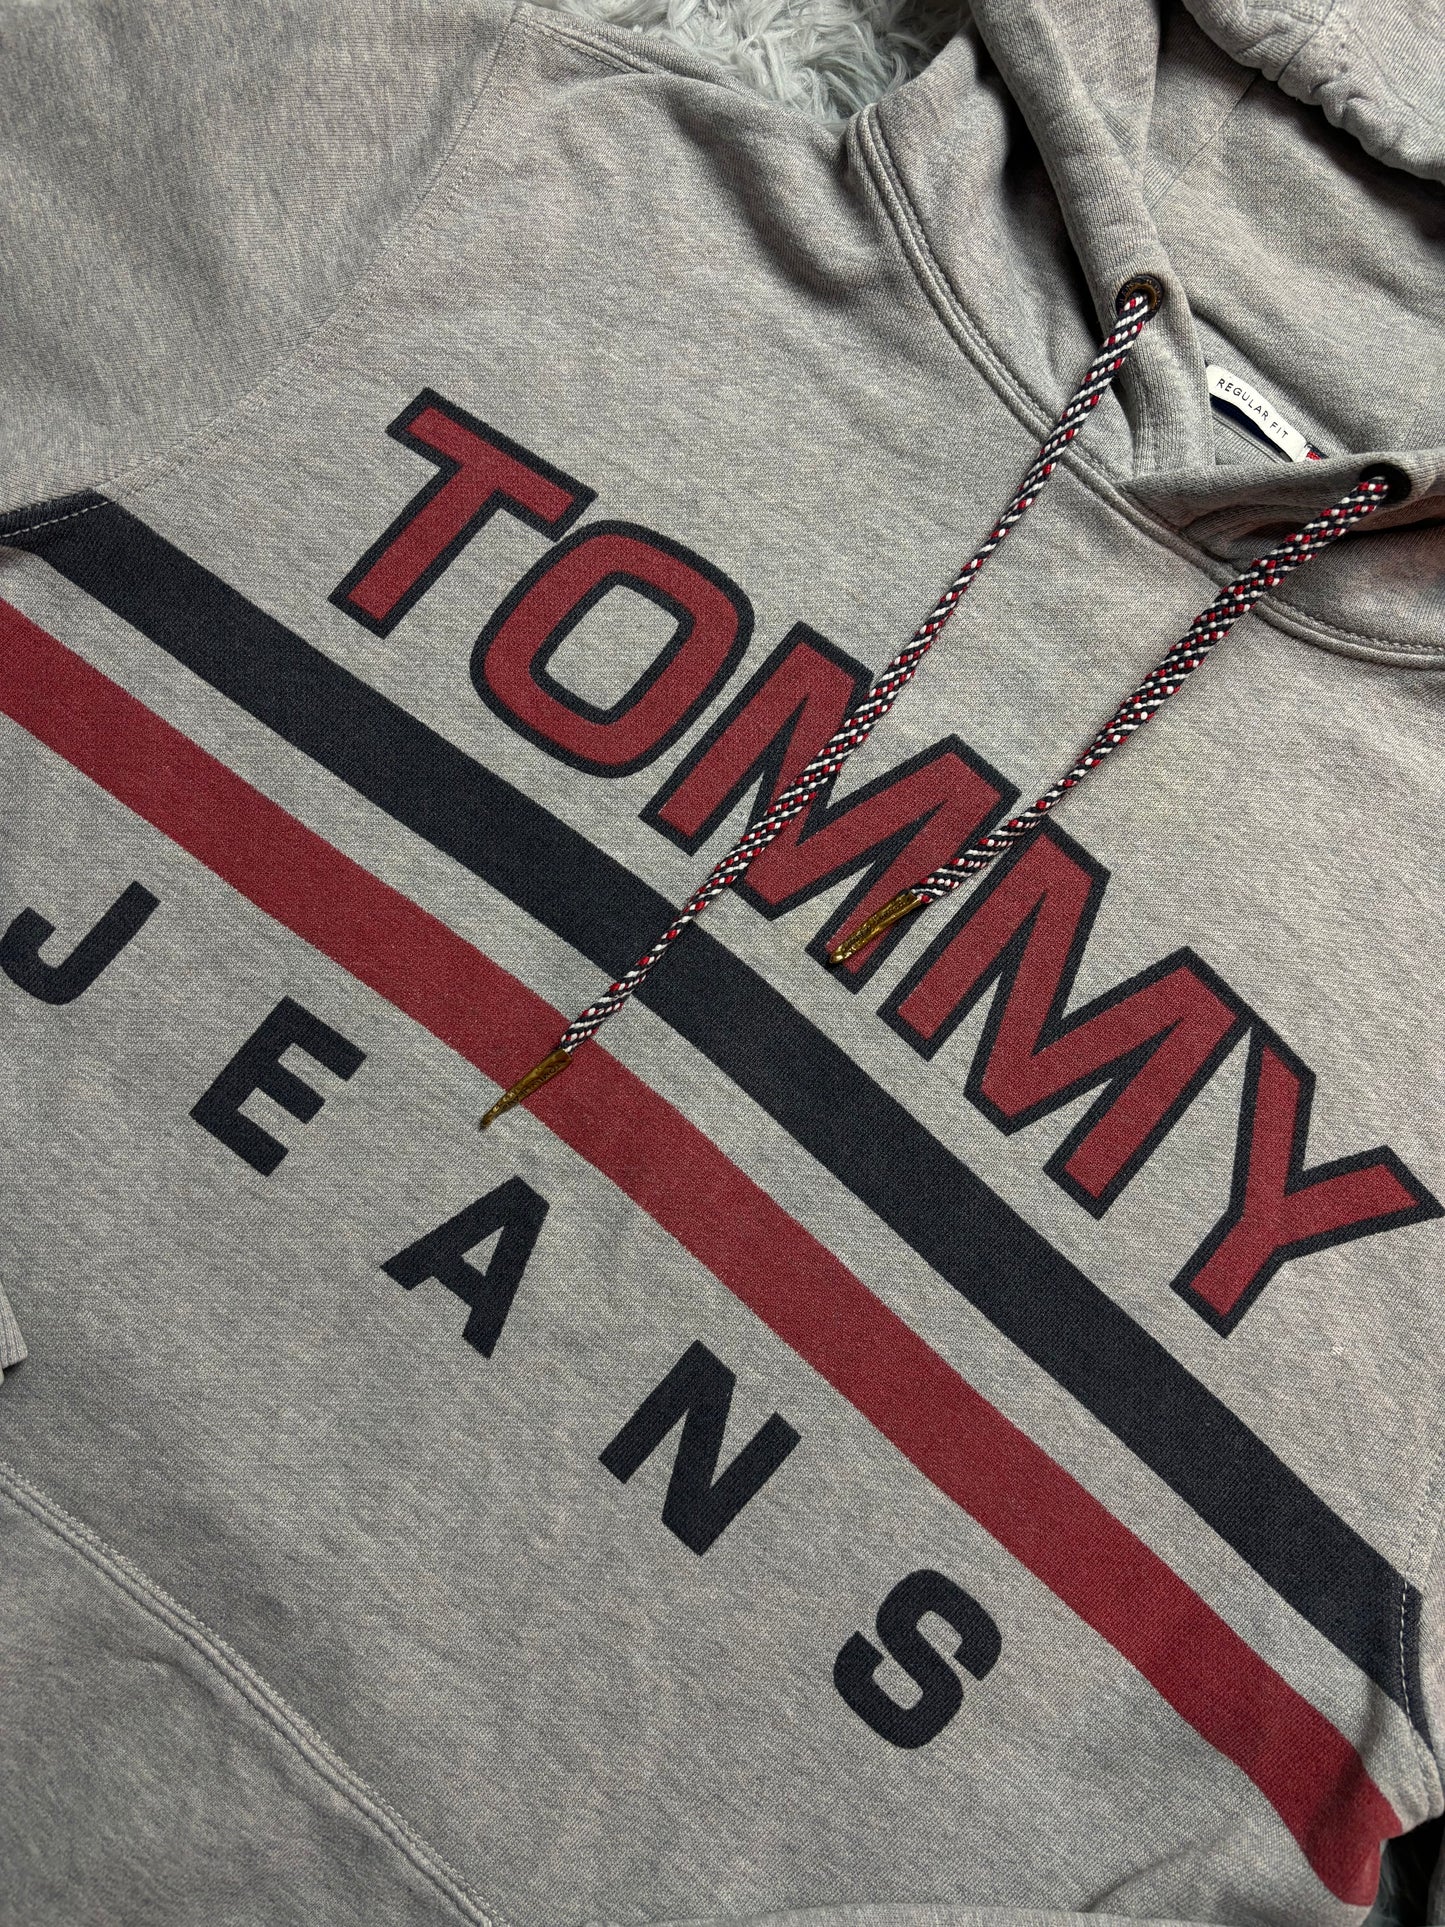 Sudadera Tommy Jeans retro - Large